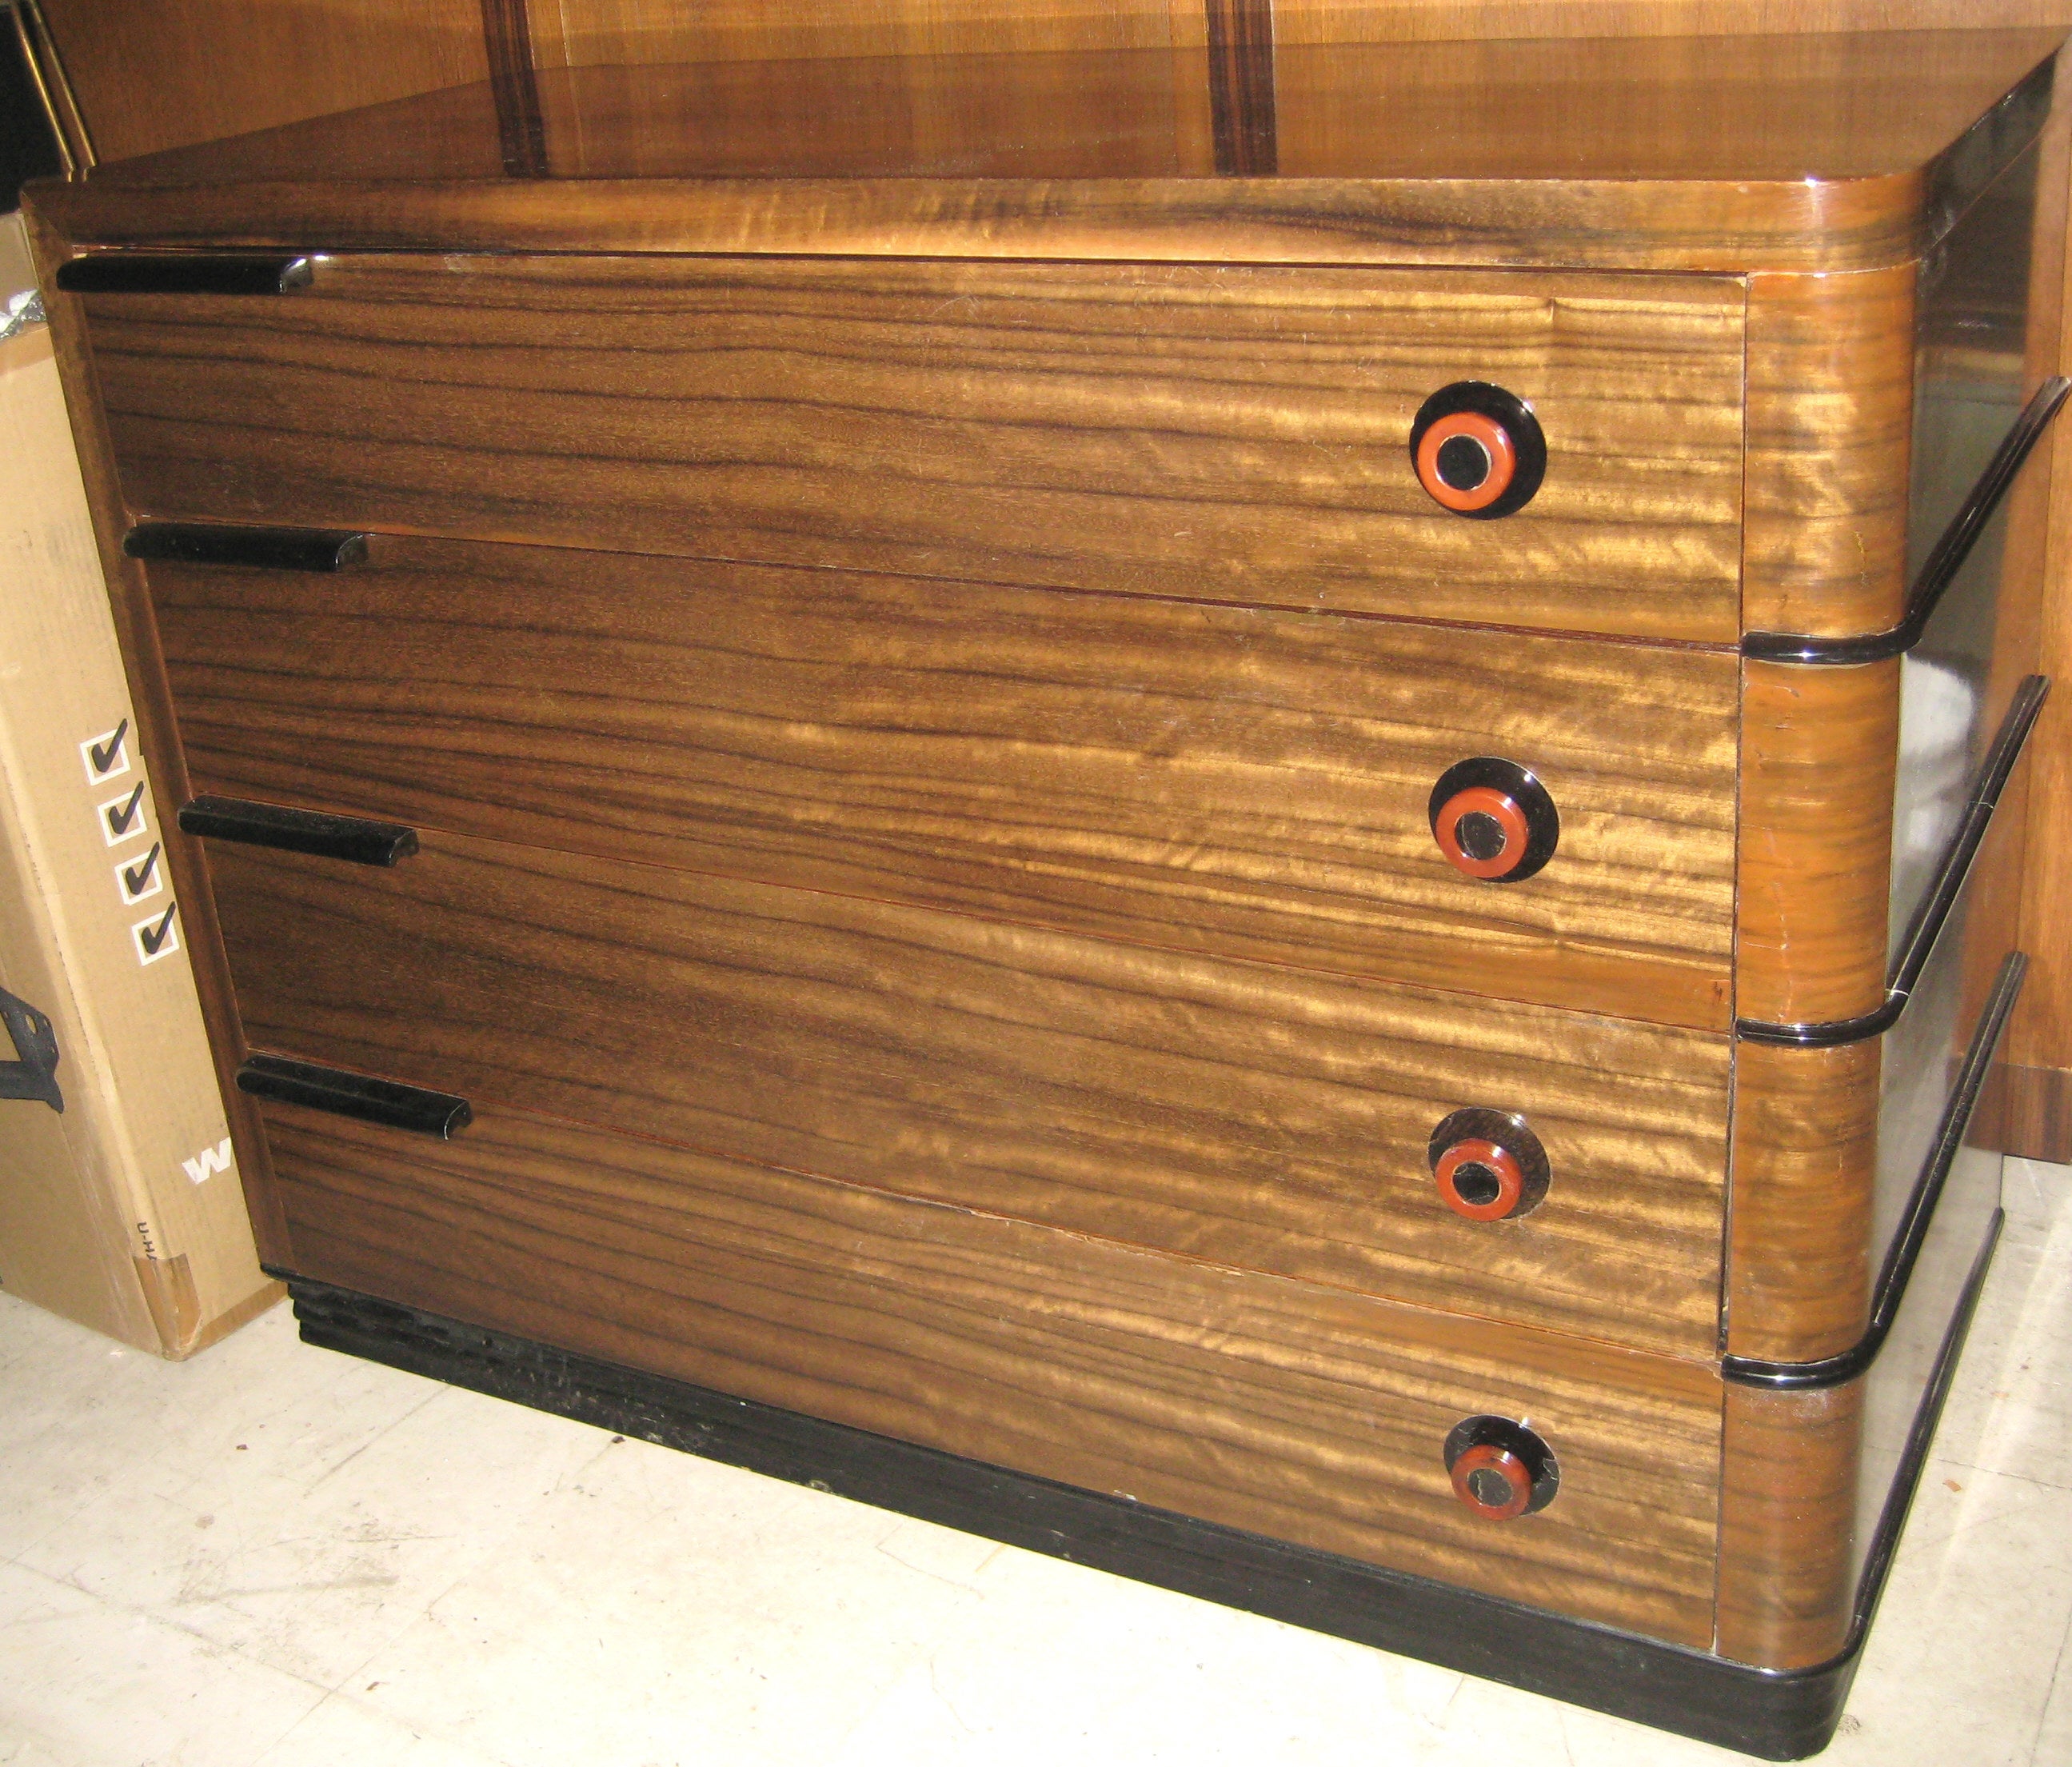 Art Deco Chest of Drawers Attributed to Donald Deskey